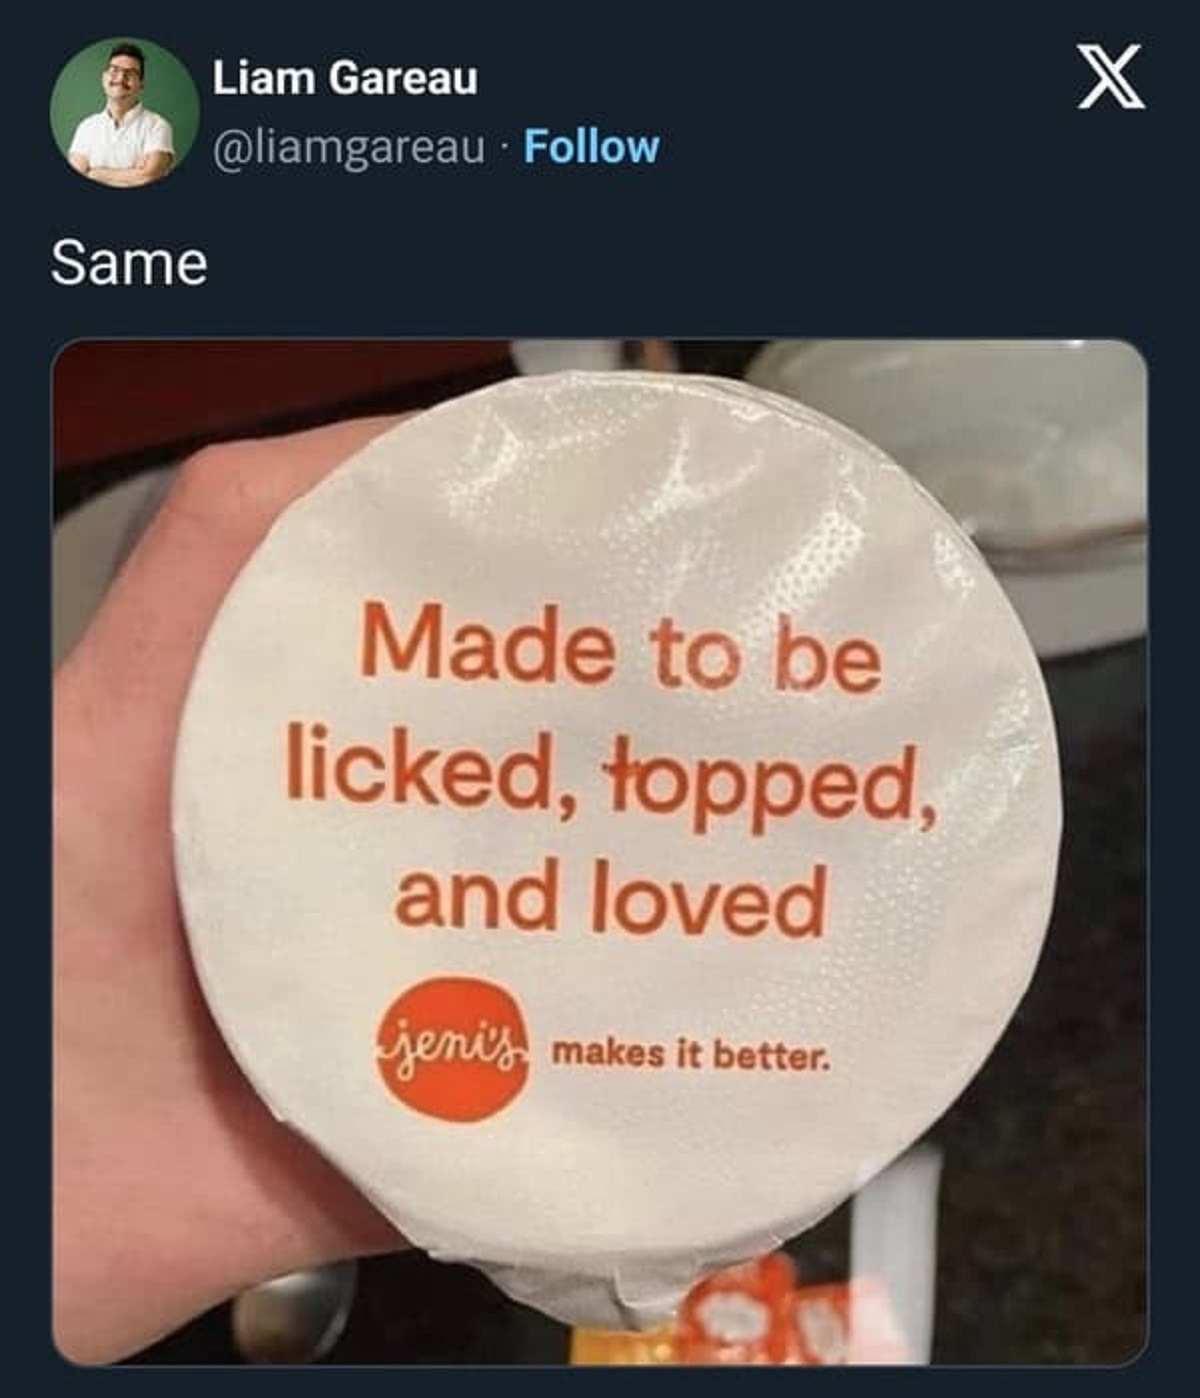 made to be licked topped and loved meme - Same Liam Gareau X Made to be licked, topped, and loved jenis makes it better.